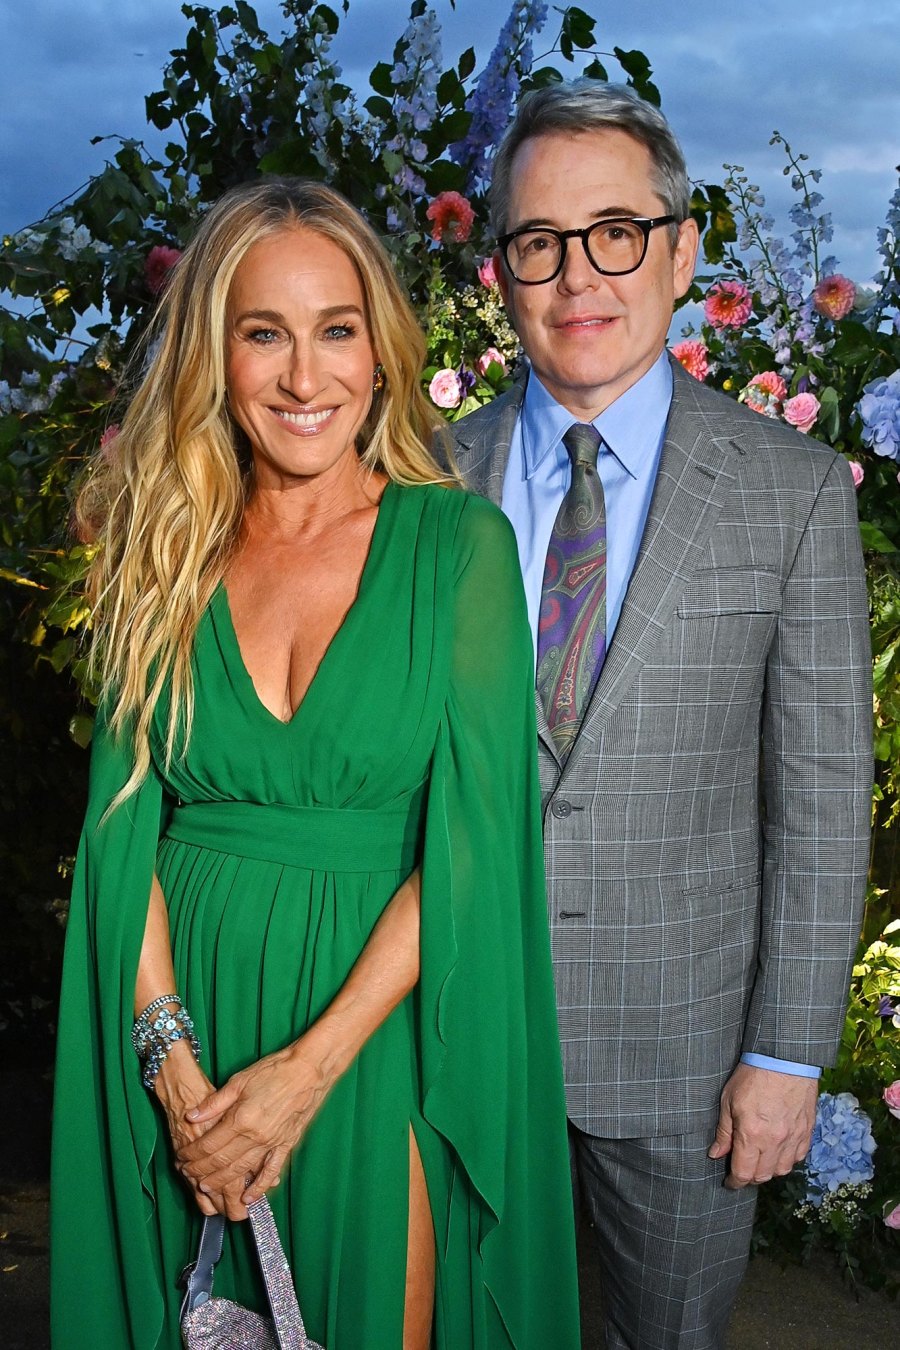 Celeb Couples Who Opened Up About Tackling Long-Distance Dating Prince Harry Meghan Markle and More GettyImages-1663483145 Sarah Jessica Parker and Matthew Broderick